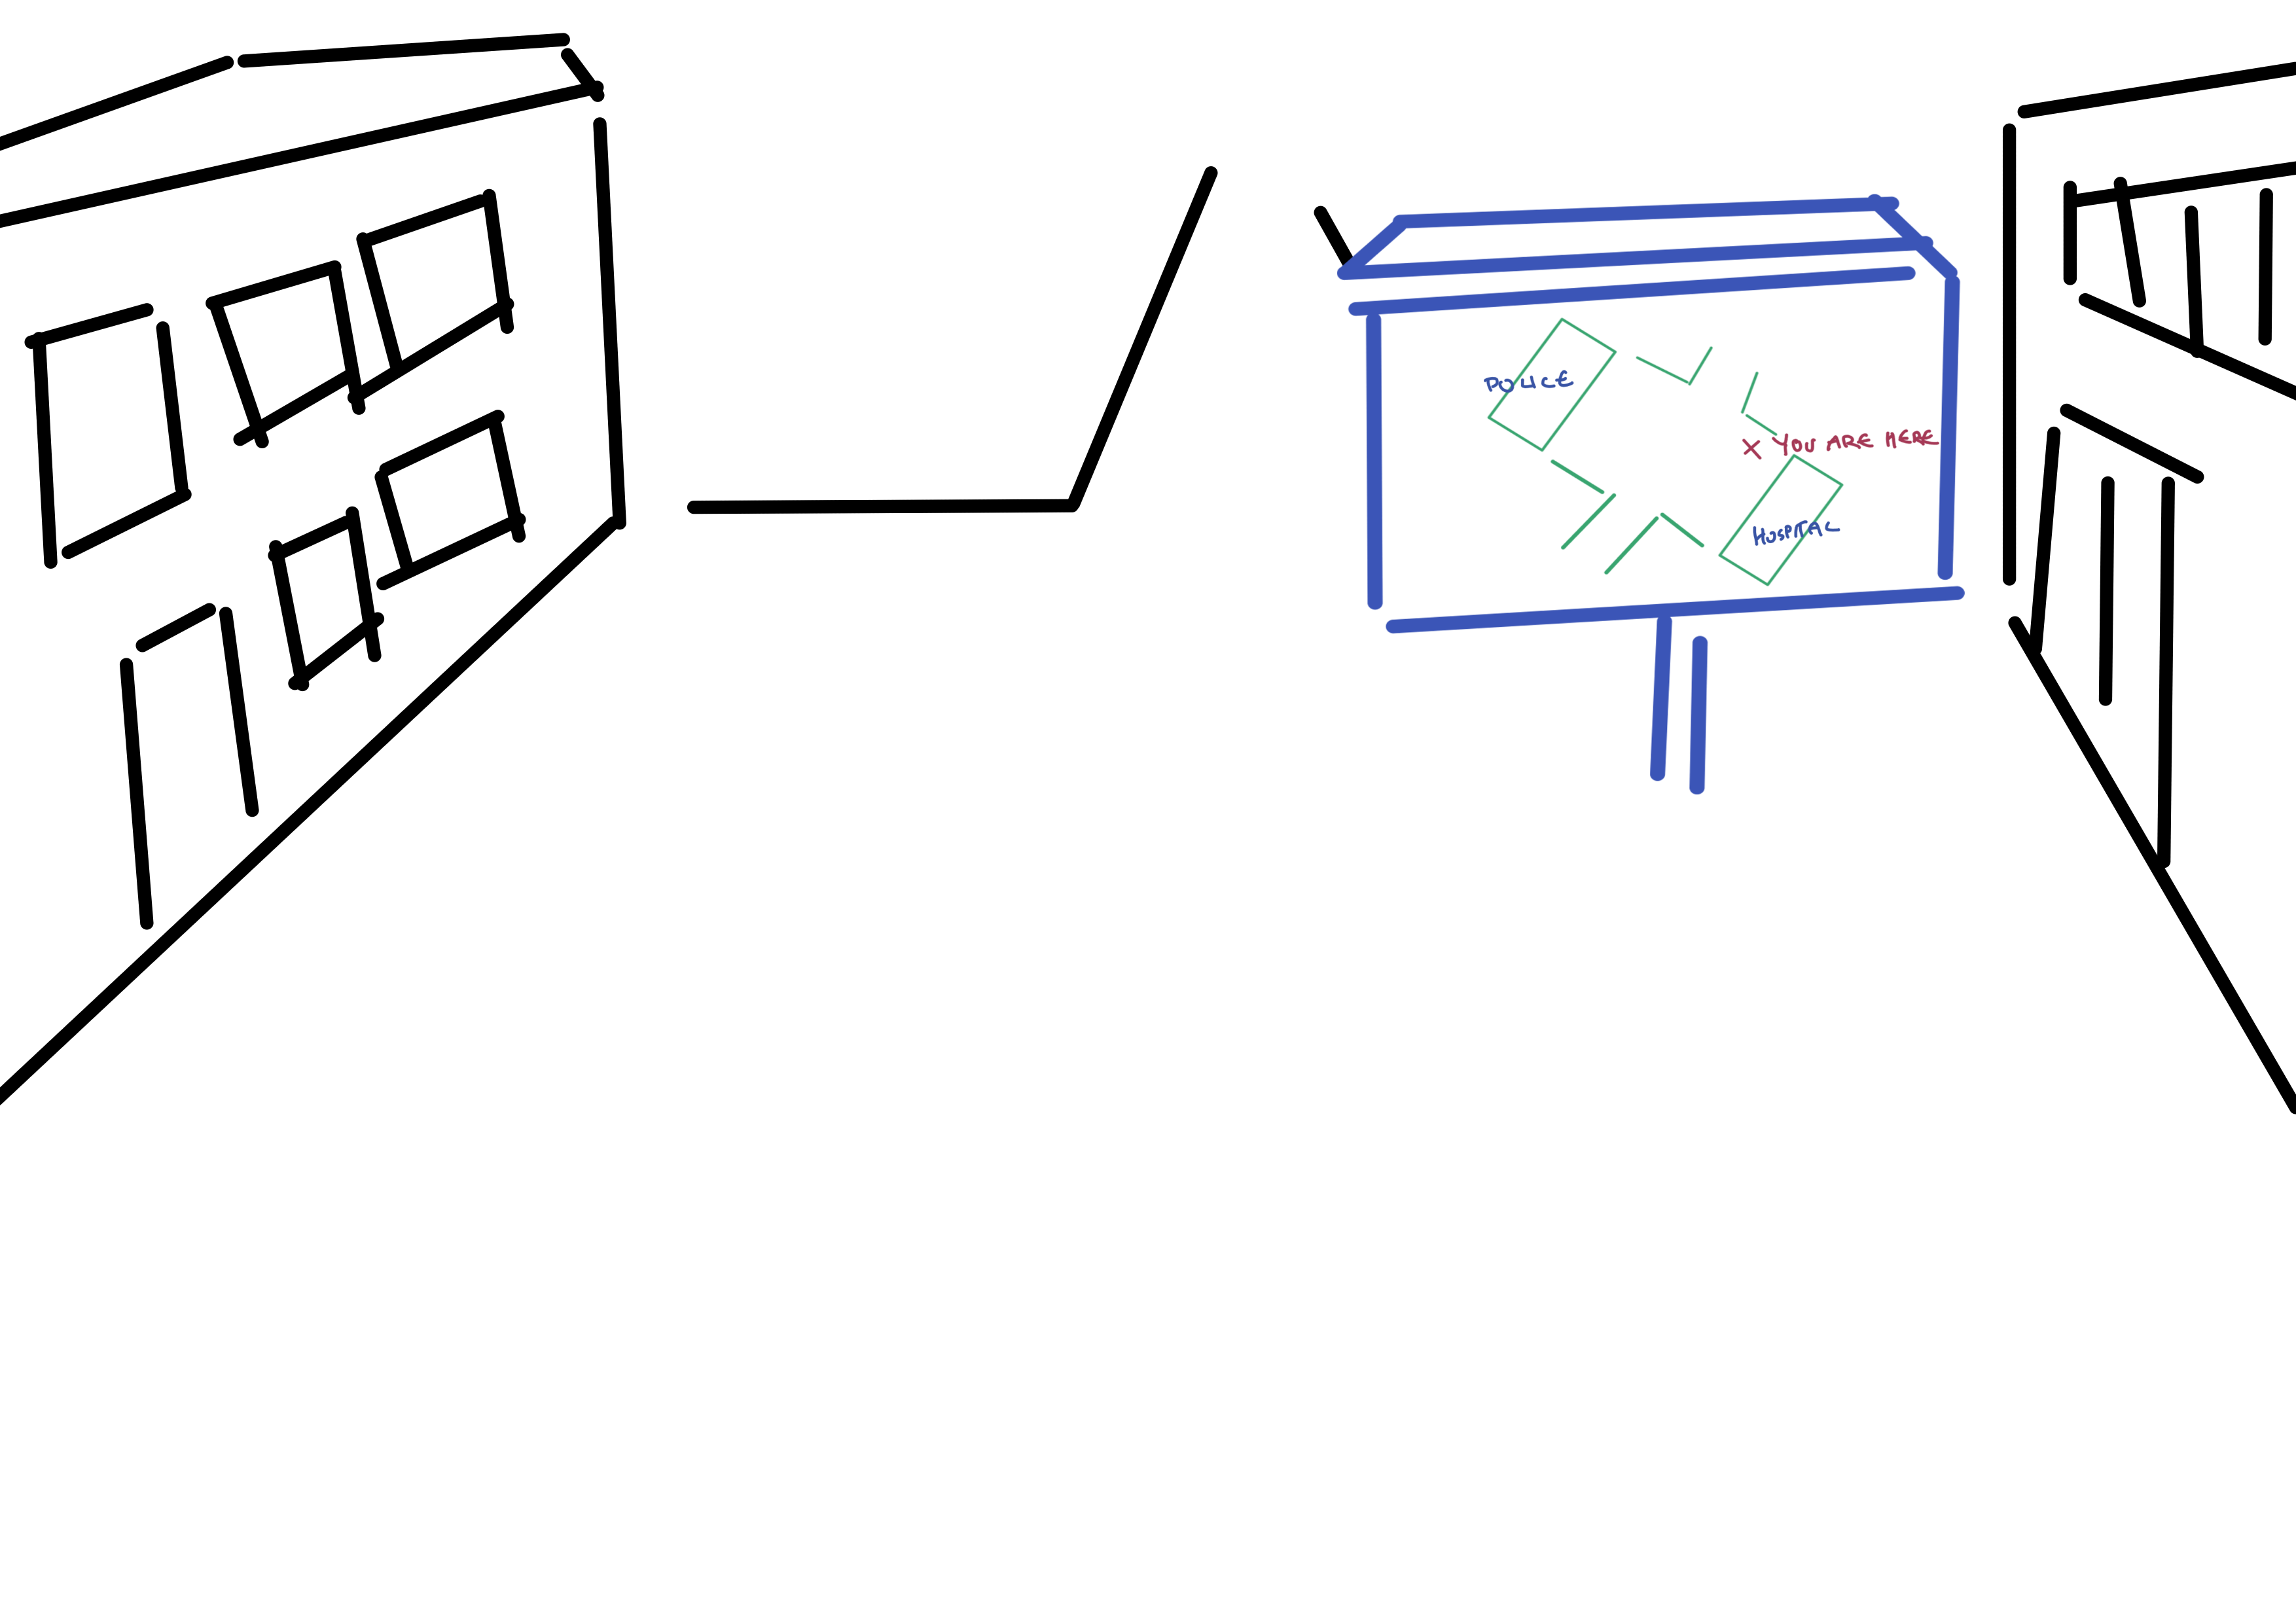 A sketch showing a symmetrical plaza with an access road at both ends and identical looking buildings lining each side. A YAH map is on a corner of the plaza directly next to a building. The map seems 'rotated', with one building at the top left labeled 'POLICE' and one on the bottom right labeled 'HOSPITAL'. The YAH marker is directly next to the building labeled 'HOSPITAL'